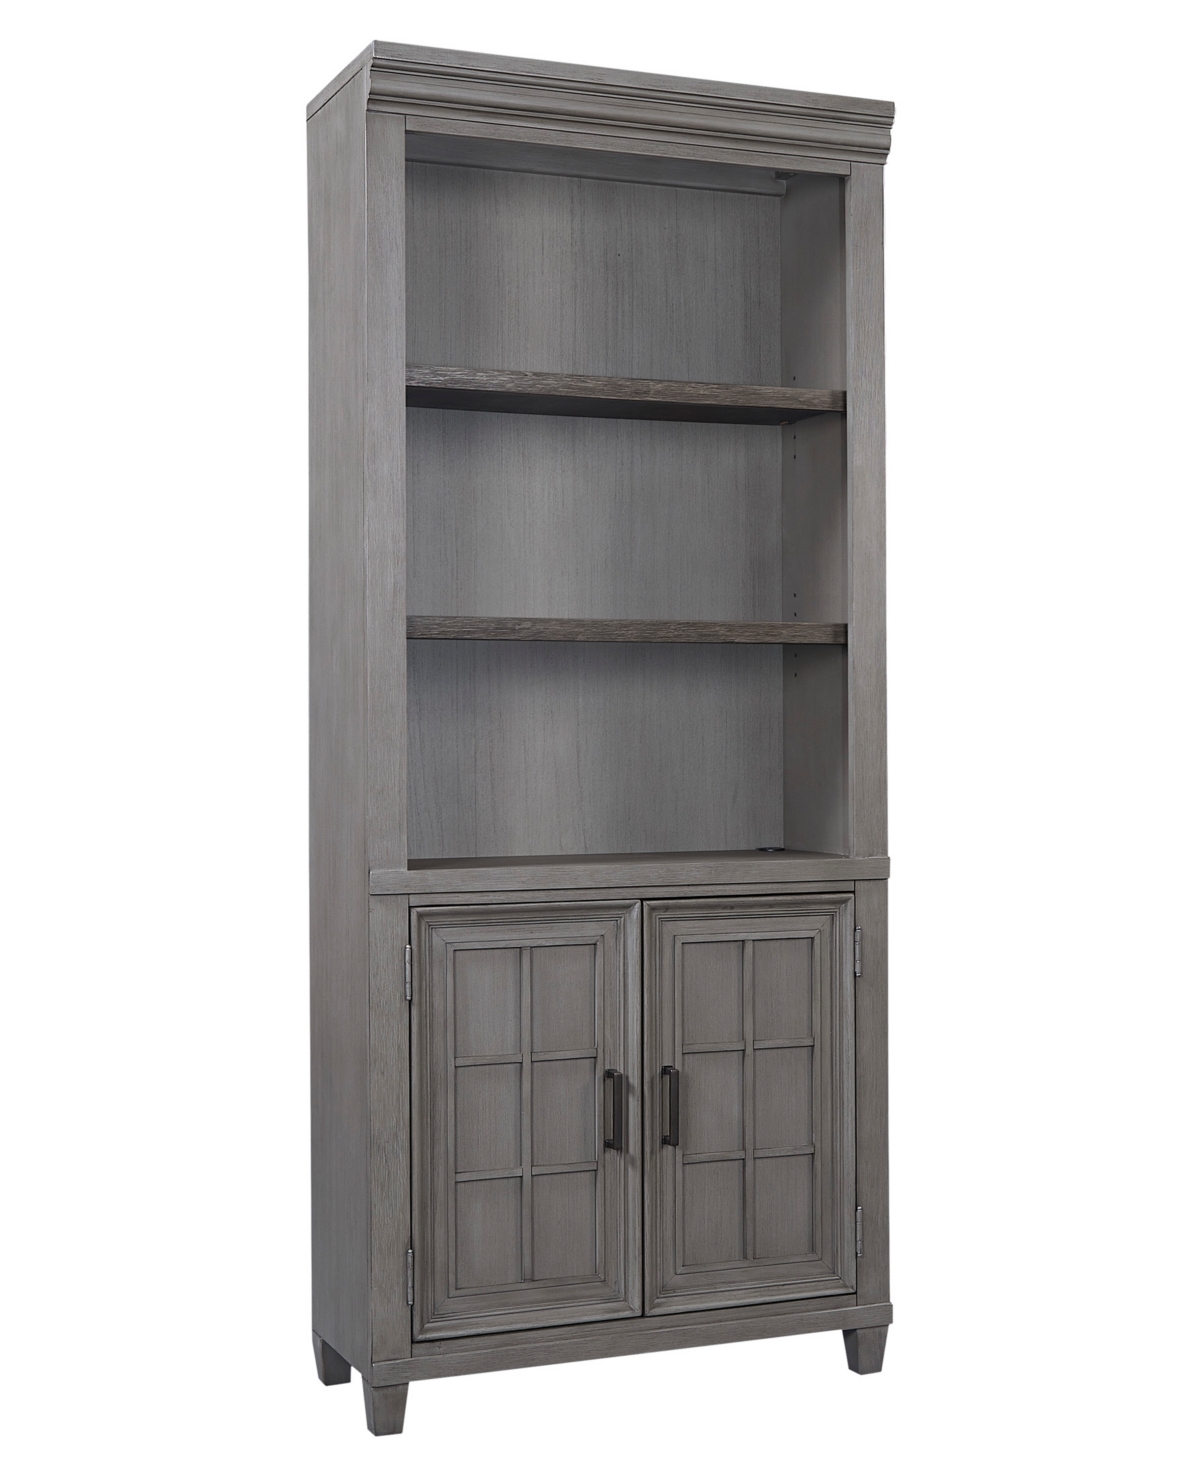 Macy's Dawnwood Home Office 3- Pc. Set (file, Open Bookcase, Door Bookcase) In Aged Slate